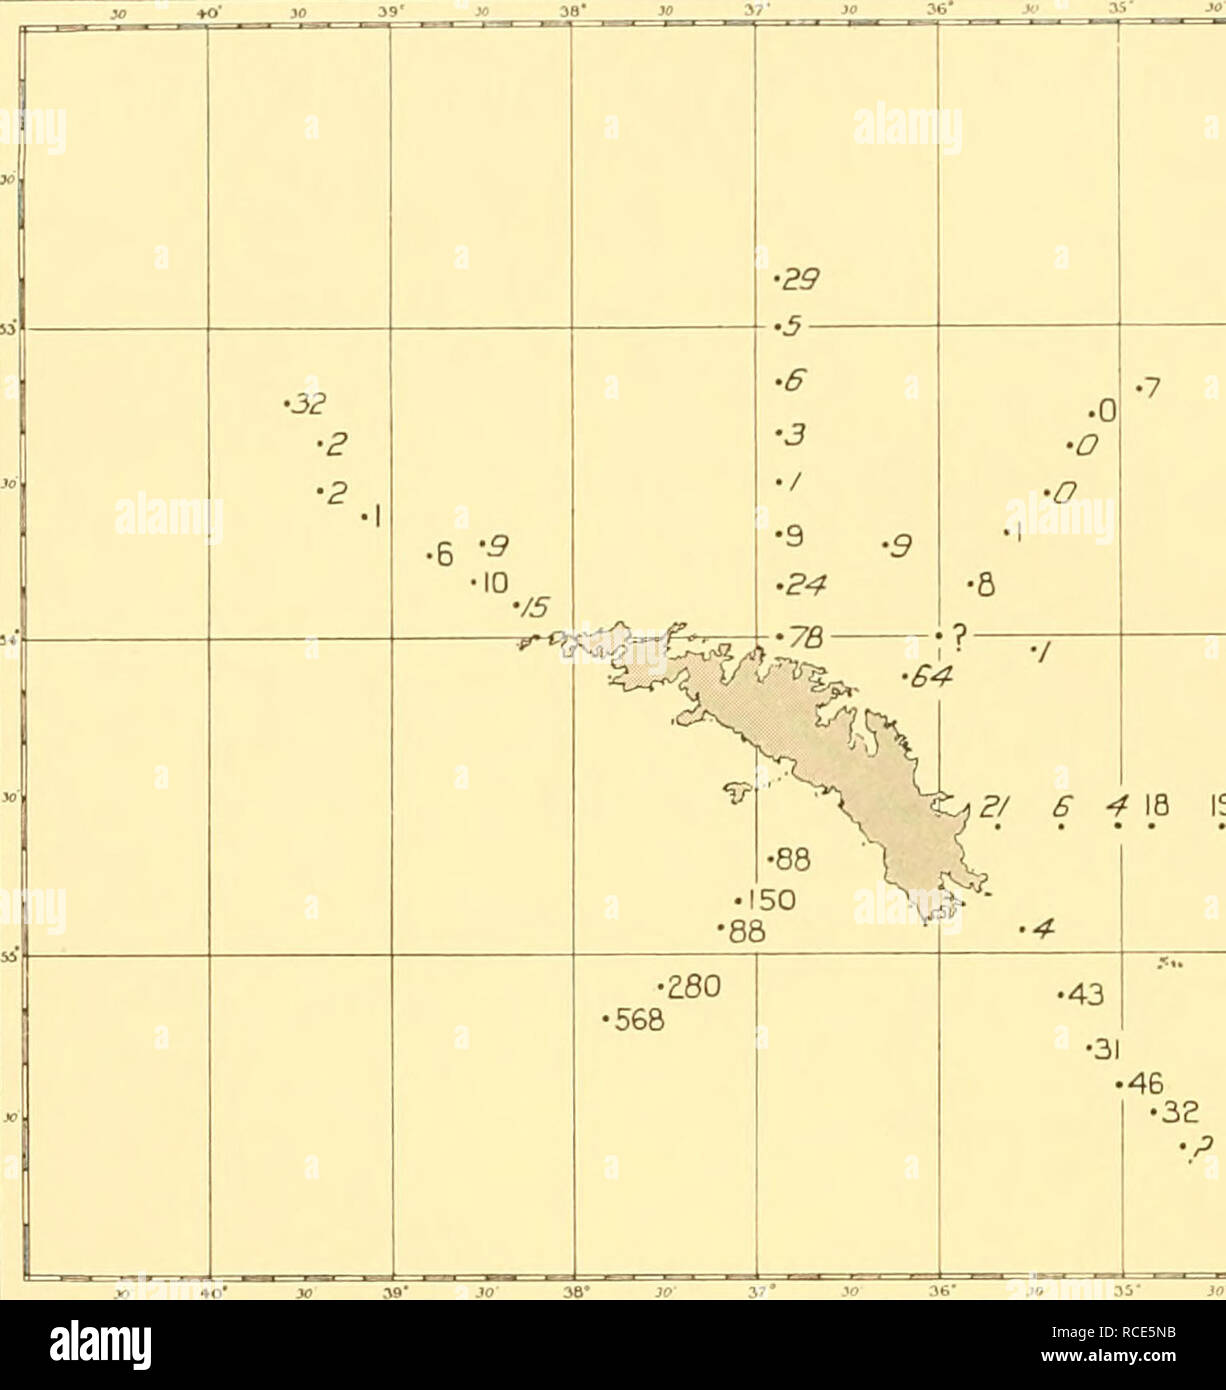 . Discovery reports. Discovery (Ship); Scientific expeditions; Ocean; Antarctica; Falkland Islands. X 4tf JO 39^. 34 ya&quot; )?/ 6 4 18 19 36 3 O Jty 3-f Fig. 24. Distribution of plankton quantities around South Georgia, 1927-8, Sts. WS 144-93. 30 +0* 30 39* â¢/ I â¢/ I -â¢II&quot; â¢4 I â¢2 I â¢2 1 â¢/a â o â o -&amp;&amp;-â¬ V TSN St 1 8 ^ / e i2 J 40' .Â«â¢ 39* JO' 36* JÂ£&quot; 37*  3i  .'o 3+' Fig. 25. Distribution of plankton quantities around South Georgia, 1928-9, Sts. WS 257-96.. Please note that these images are extracted from scanned page images that may have been digitally enhance Stock Photo